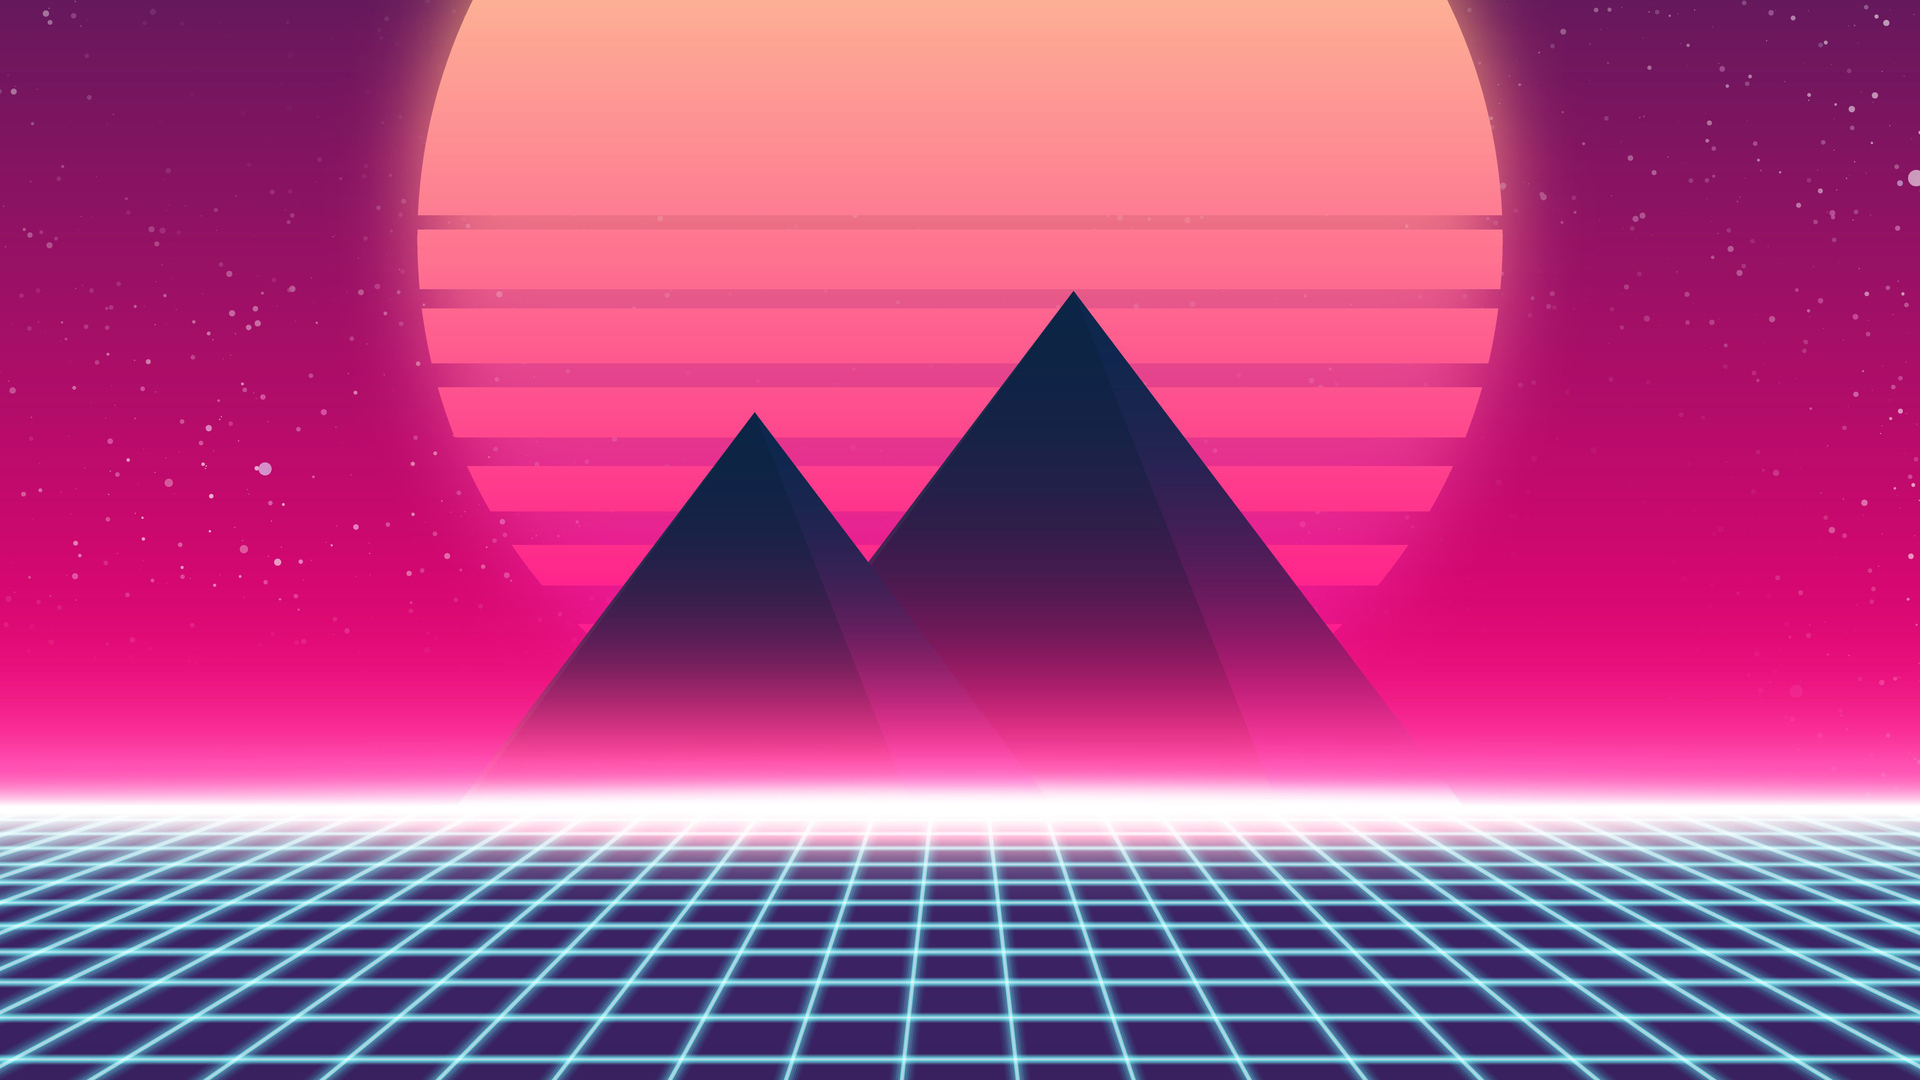 1920x1080 Retrowave 90s Laptop Full Hd 1080p Hd 4k Wallpapers Images